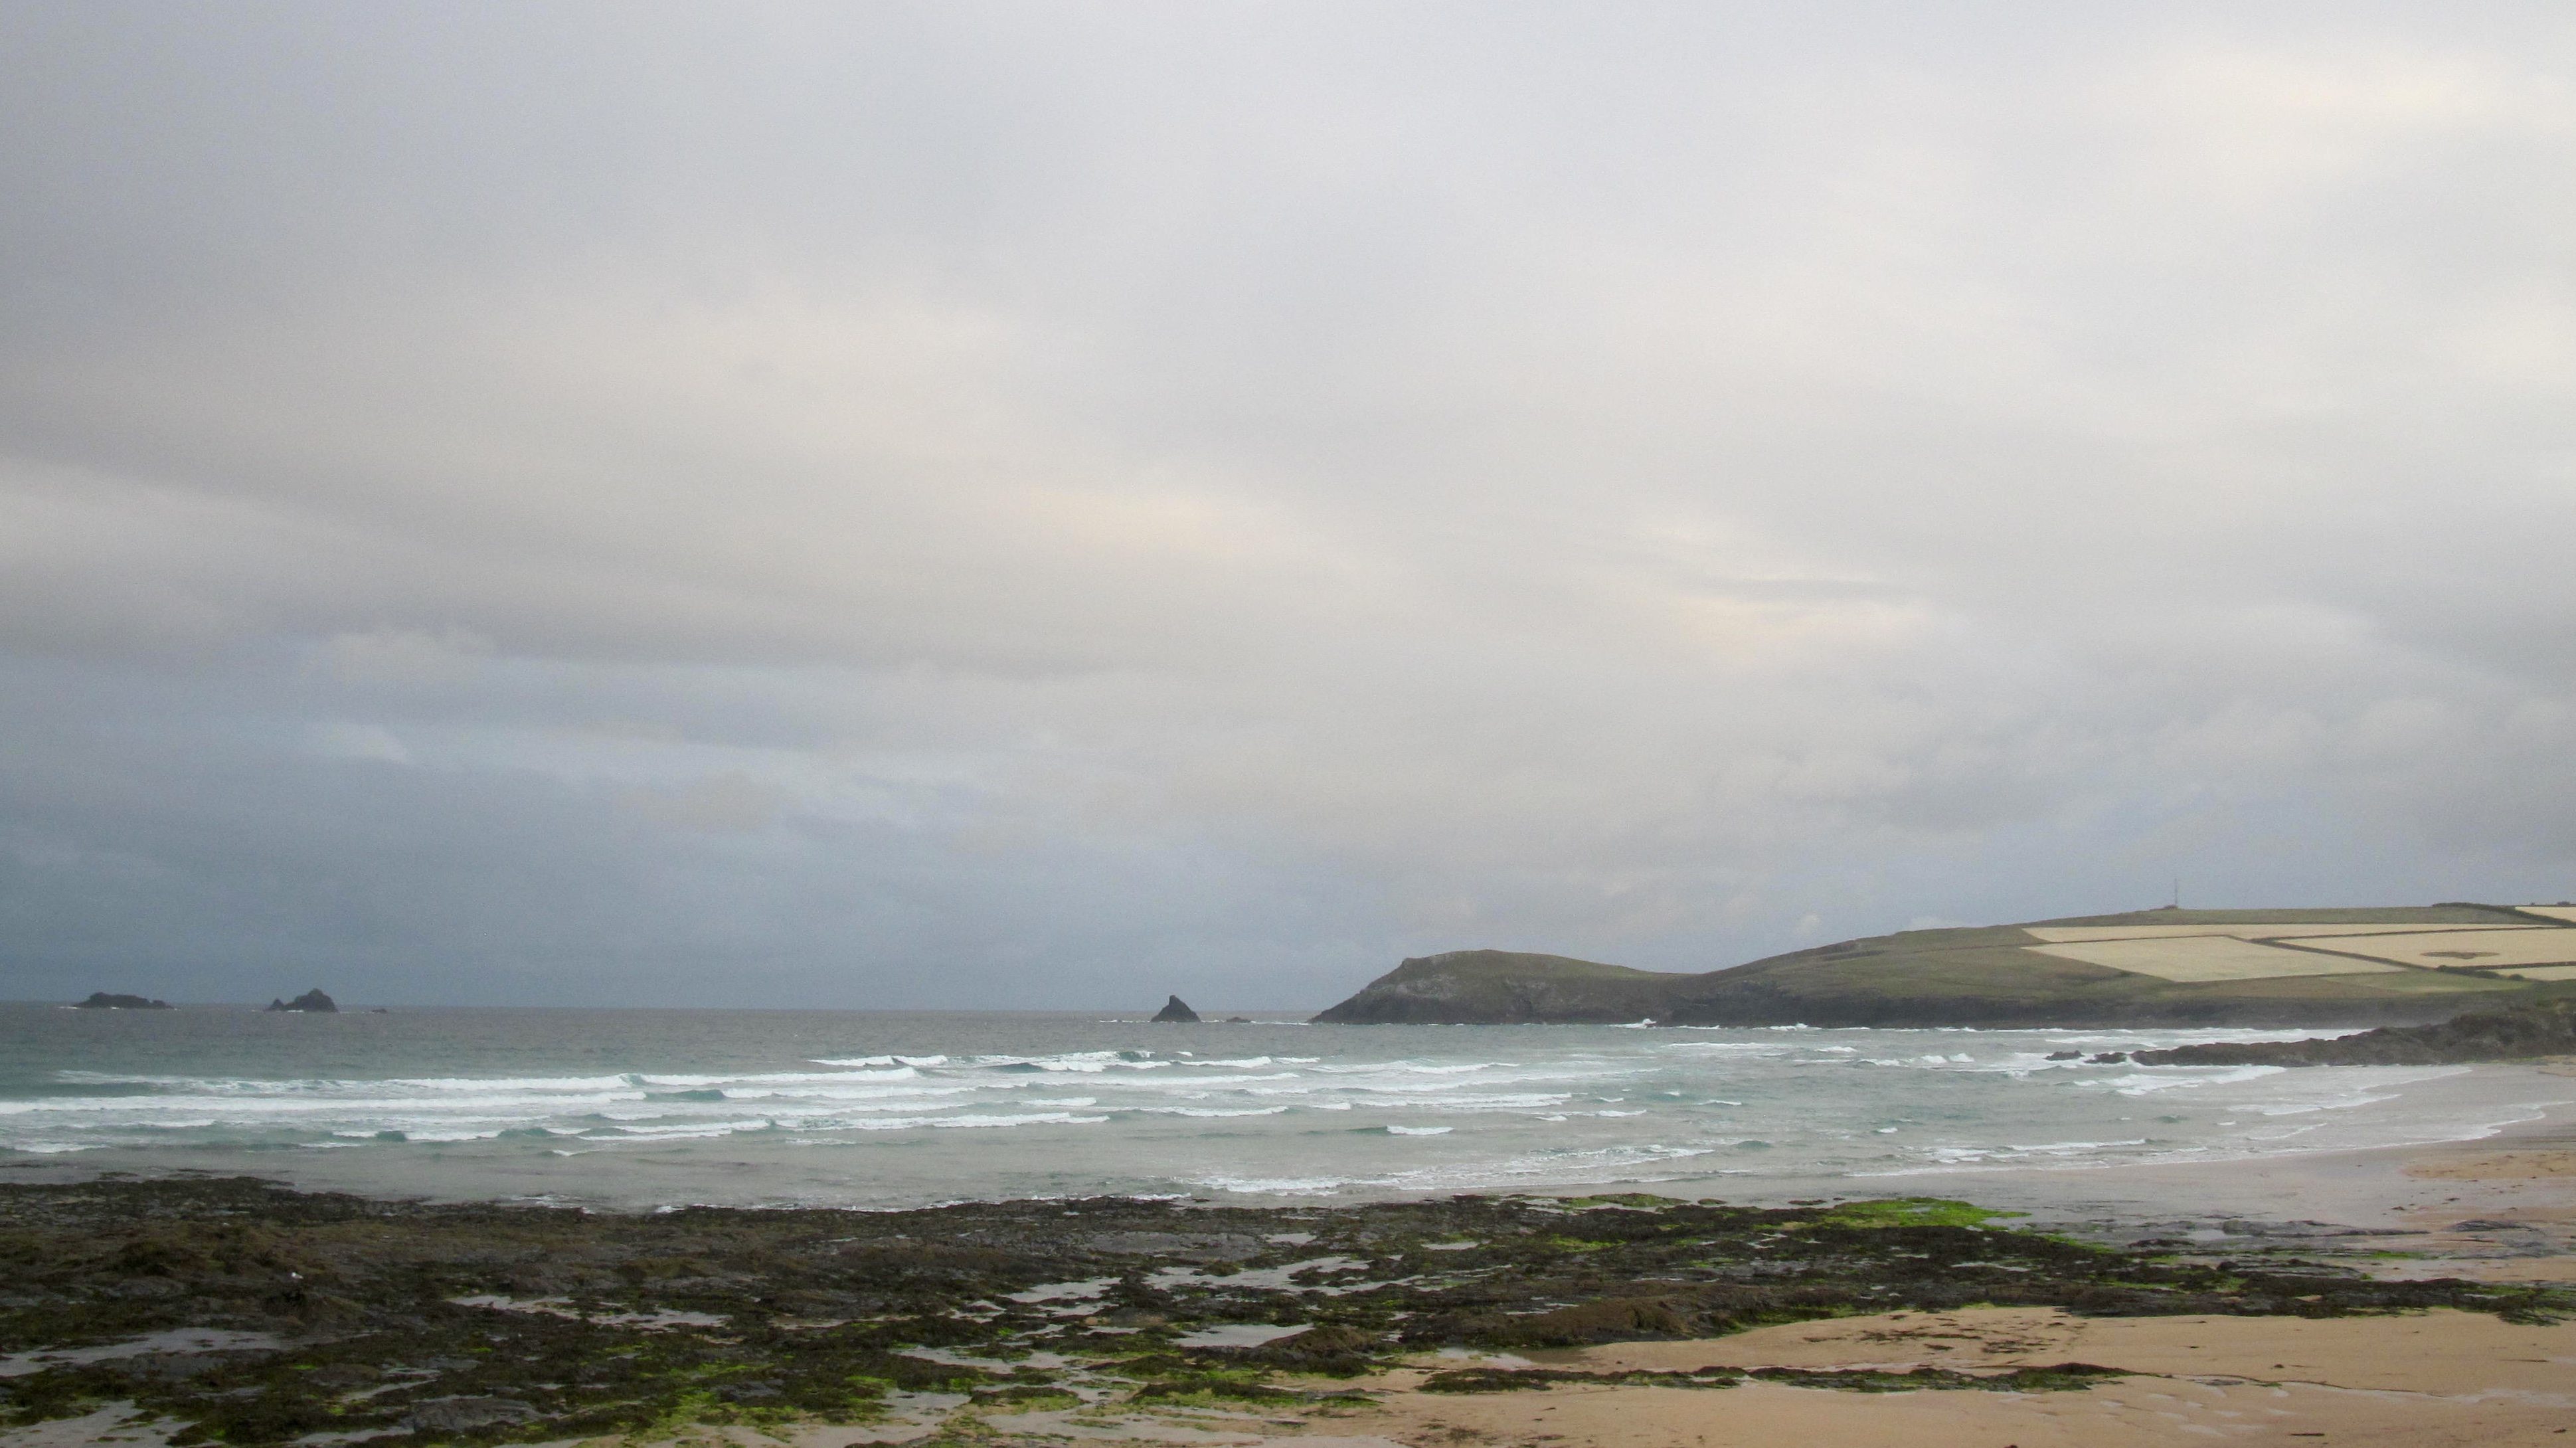 Surf Report for Wednesday 22nd July 2015